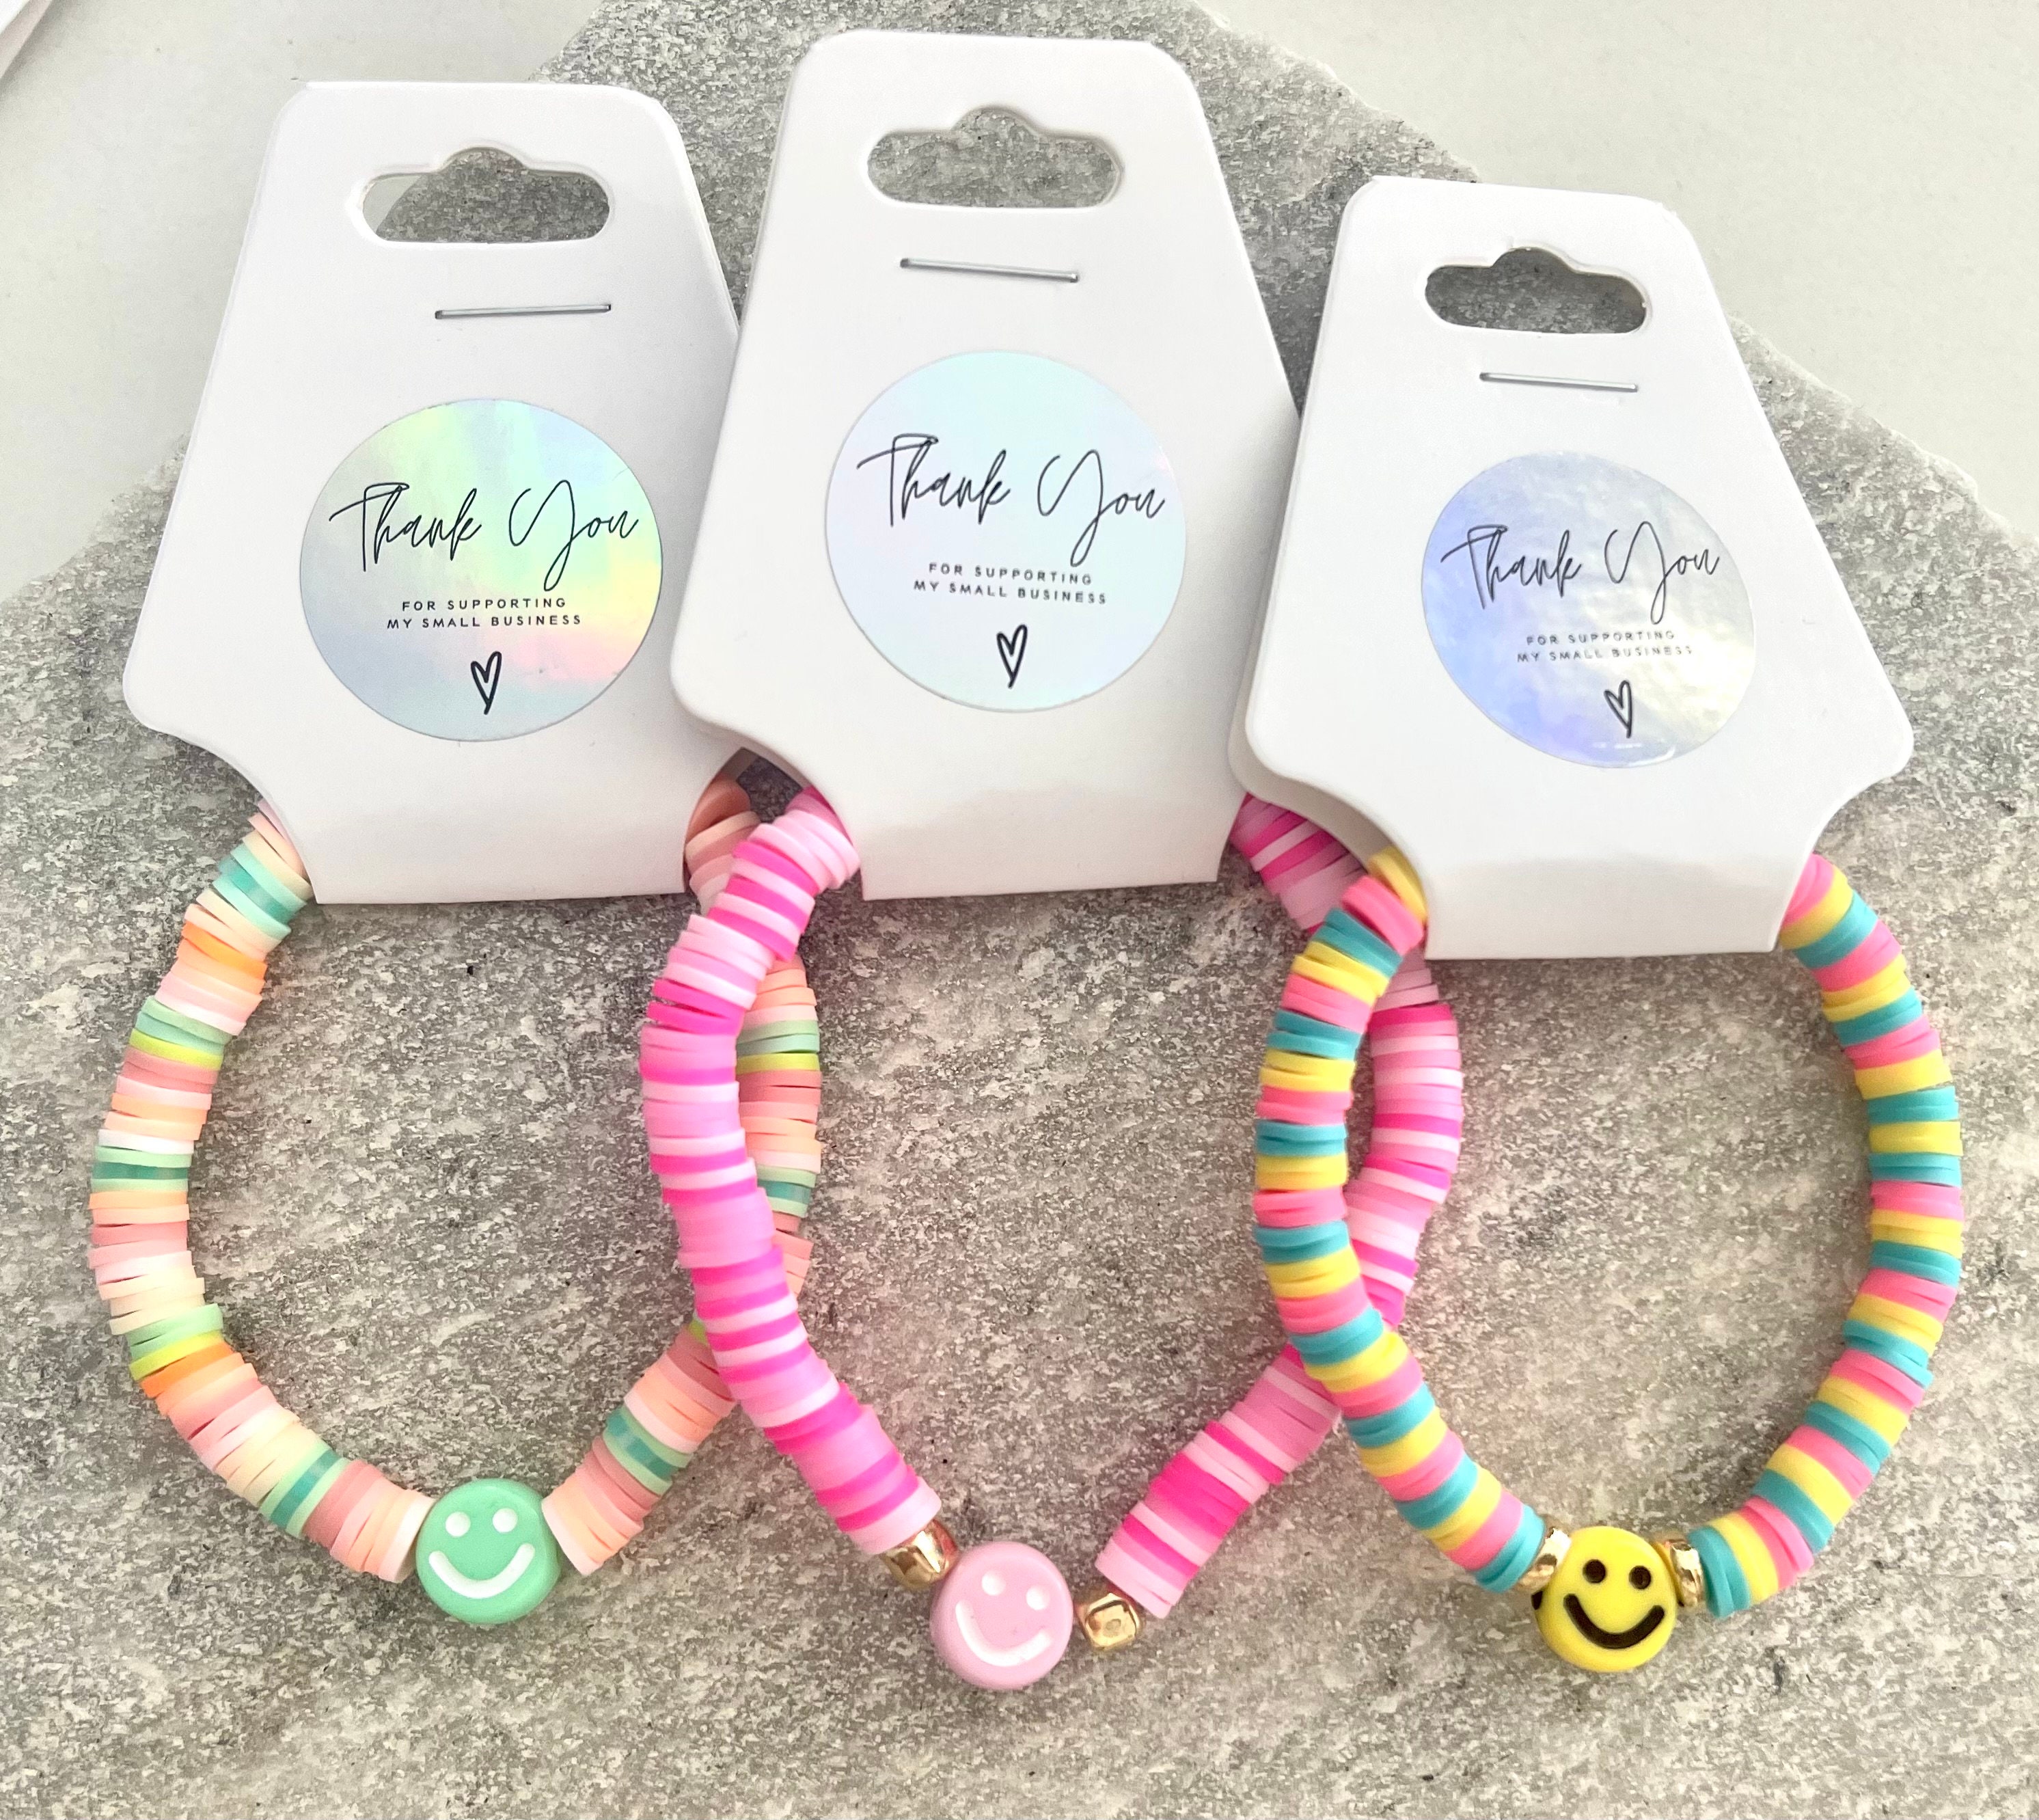 Coloured Smiley Face Bracelets -   Clay bead necklace, Homemade  bracelets, Clay beads